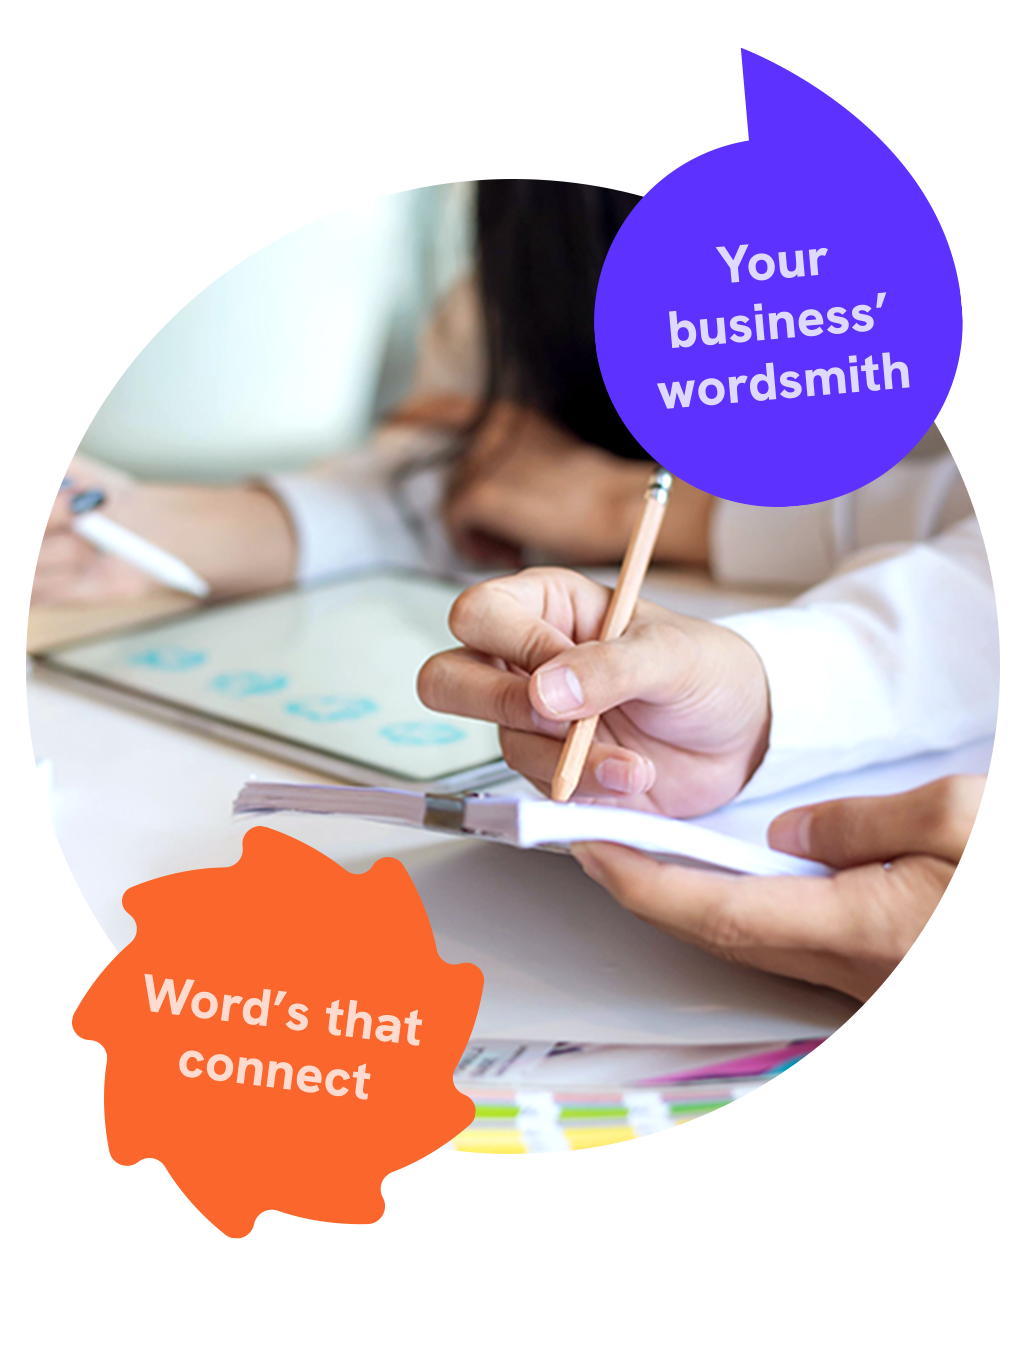 Your business’ wordsmith